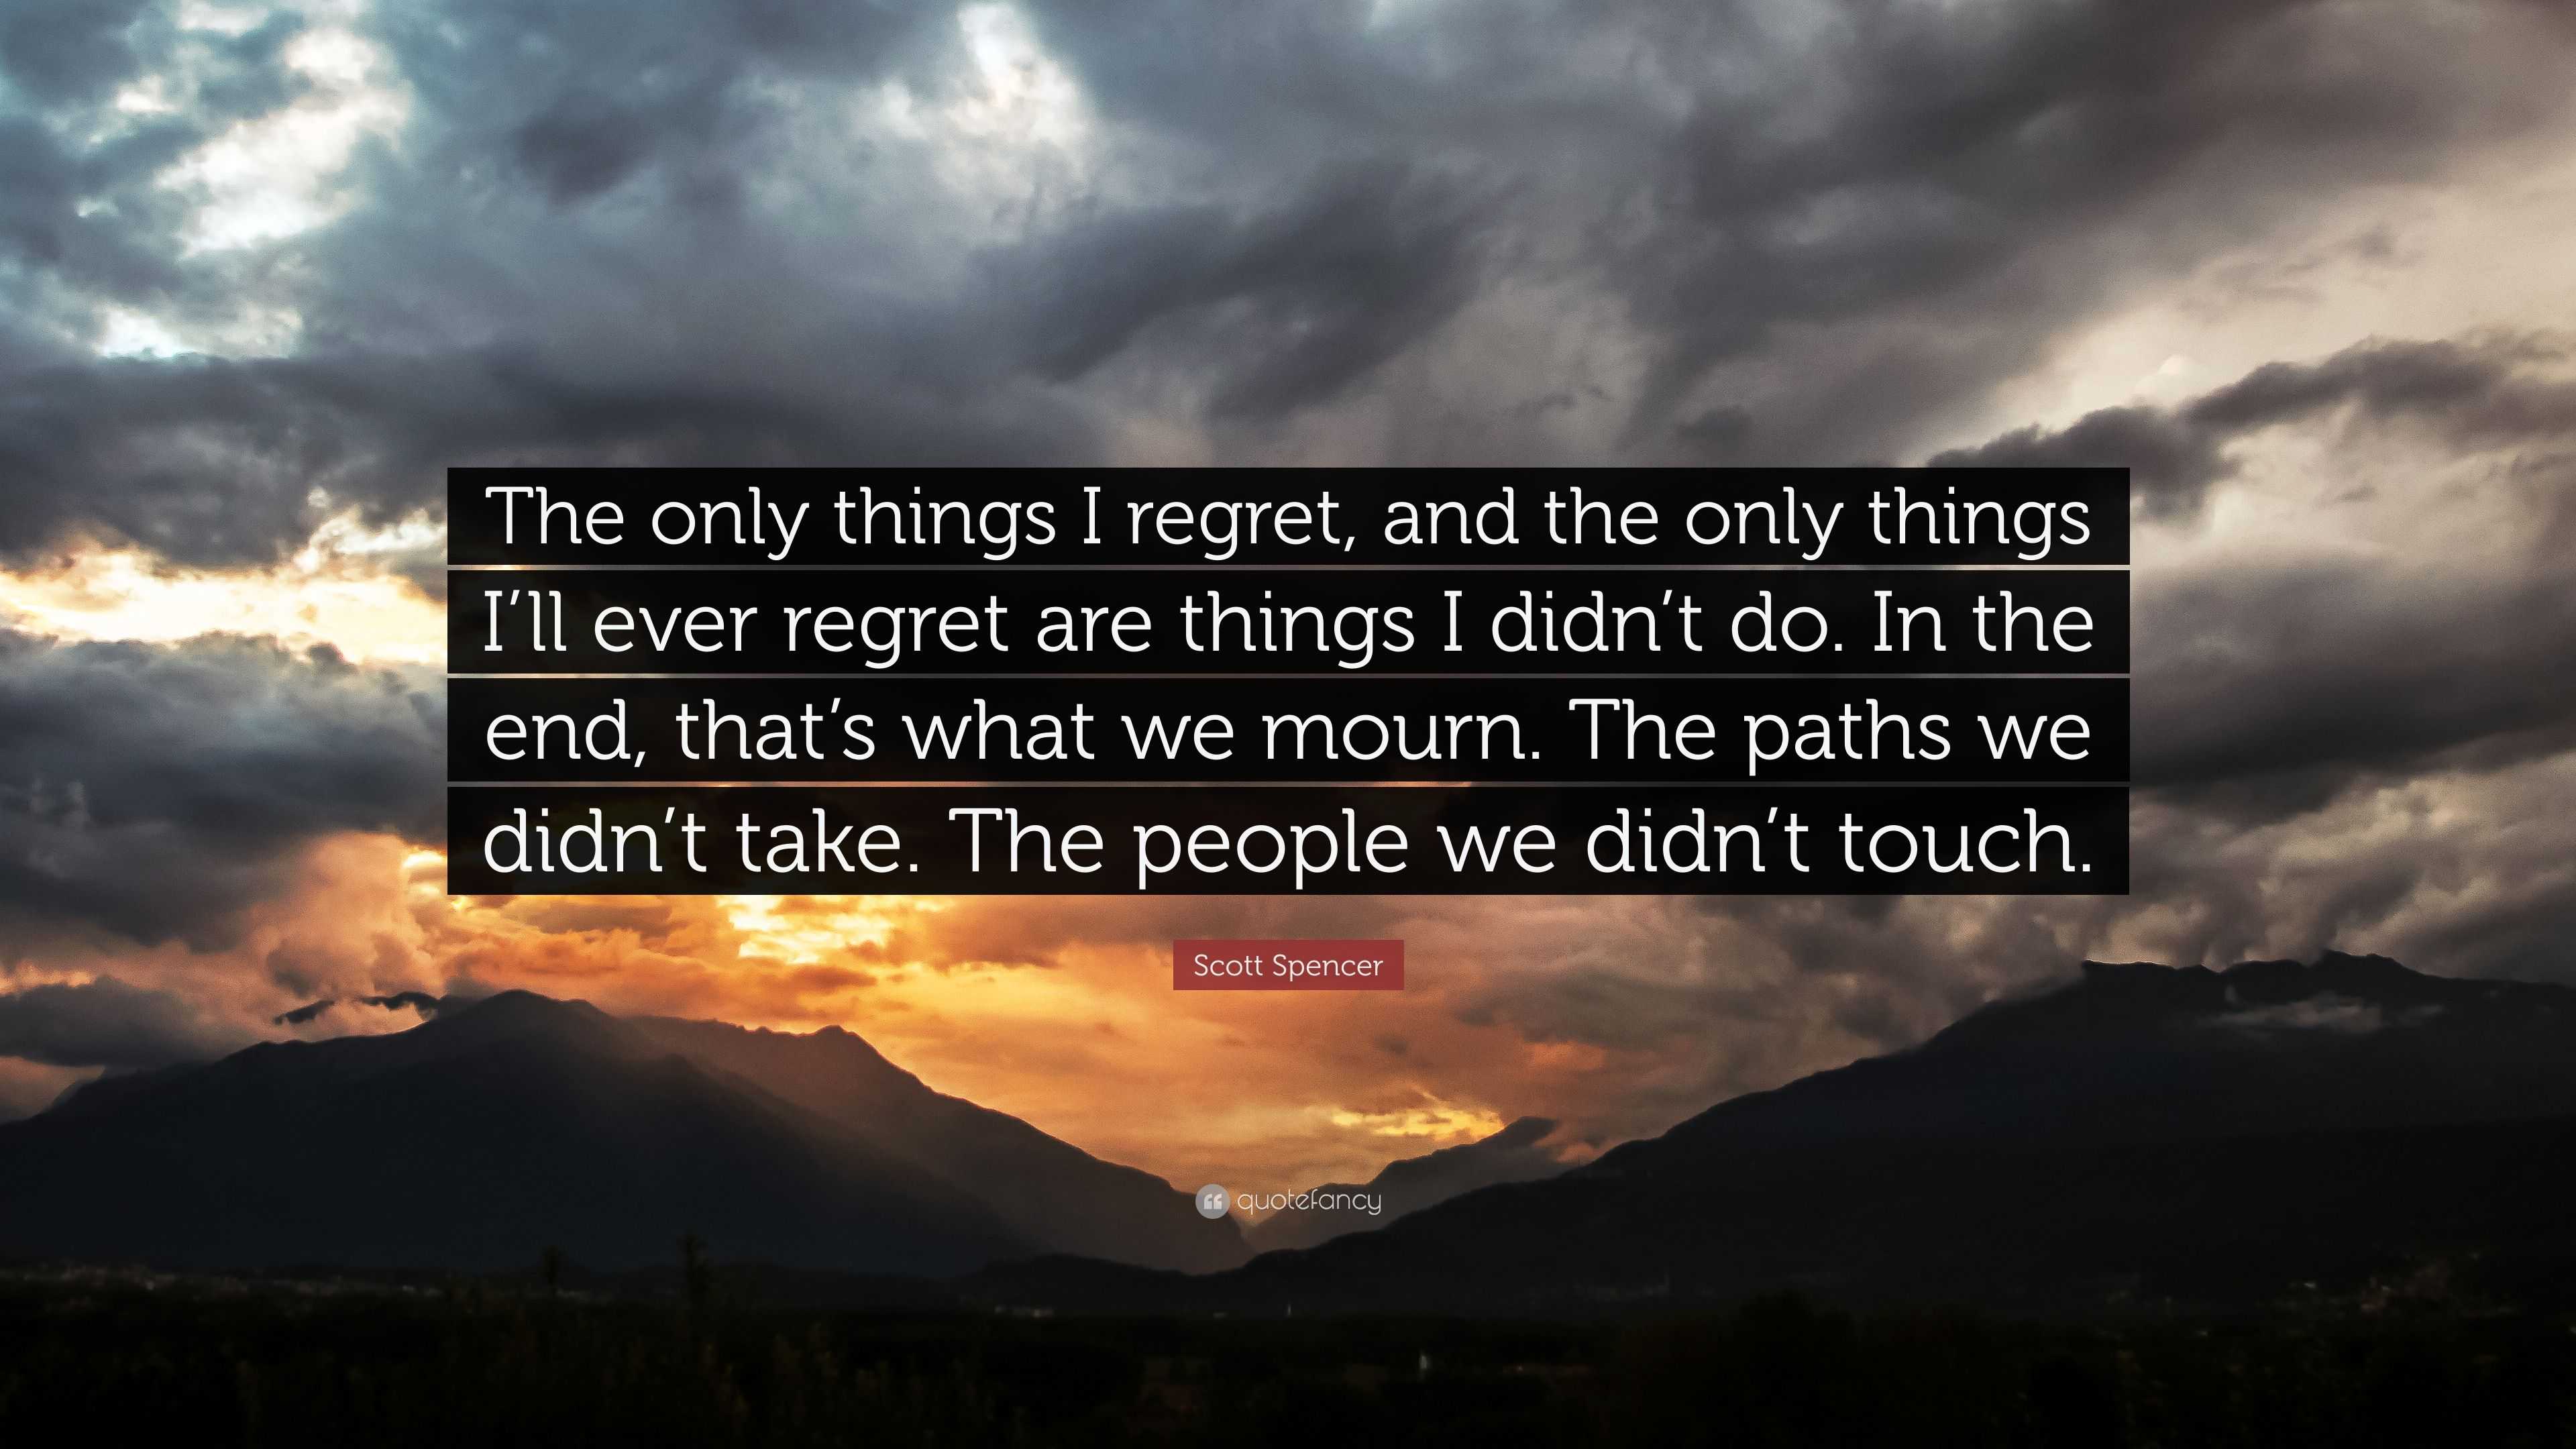 Scott Spencer Quote: “The only things I regret, and the only things I ...